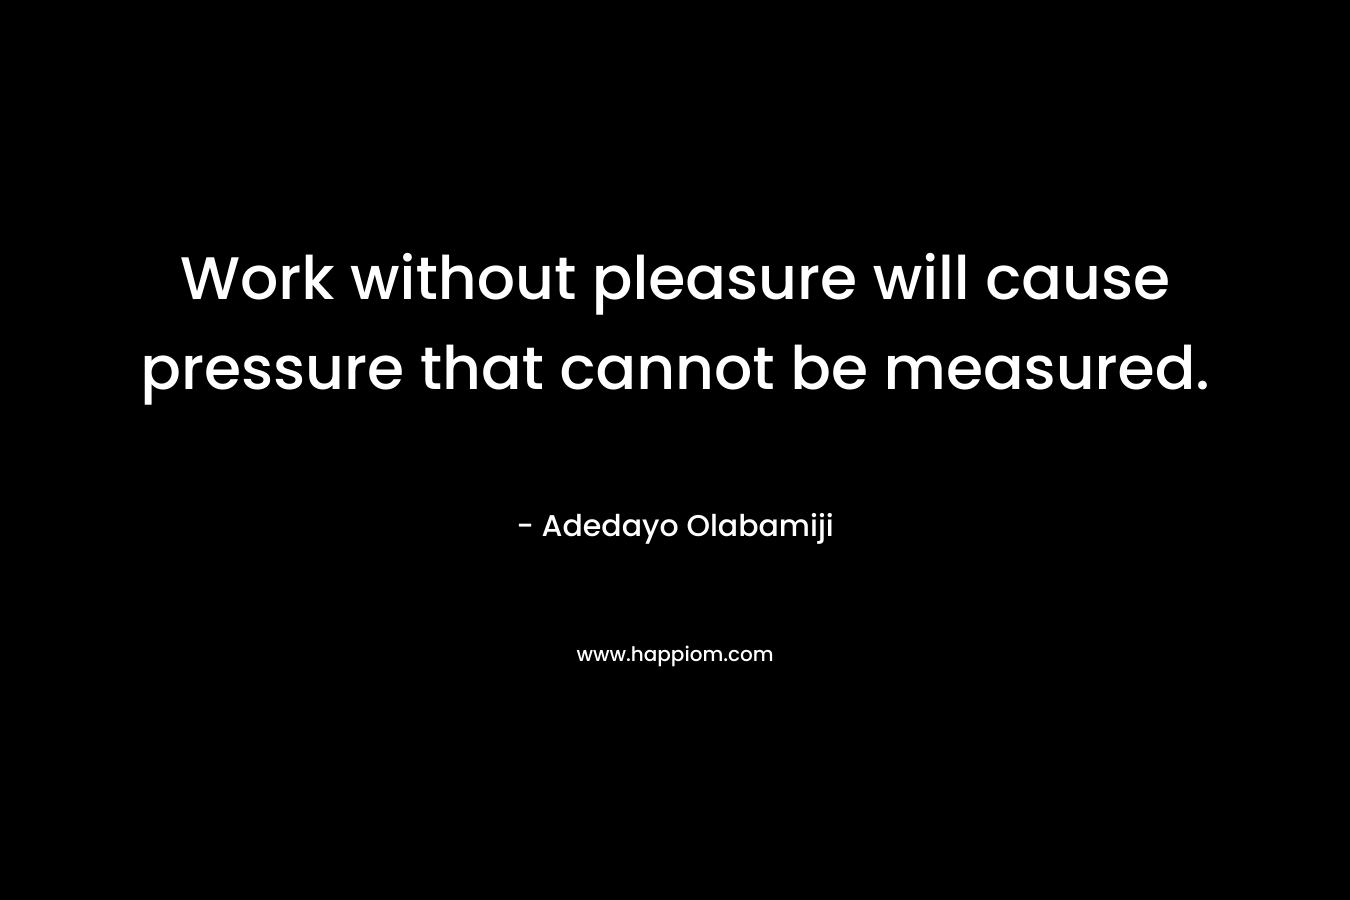 Work without pleasure will cause pressure that cannot be measured.